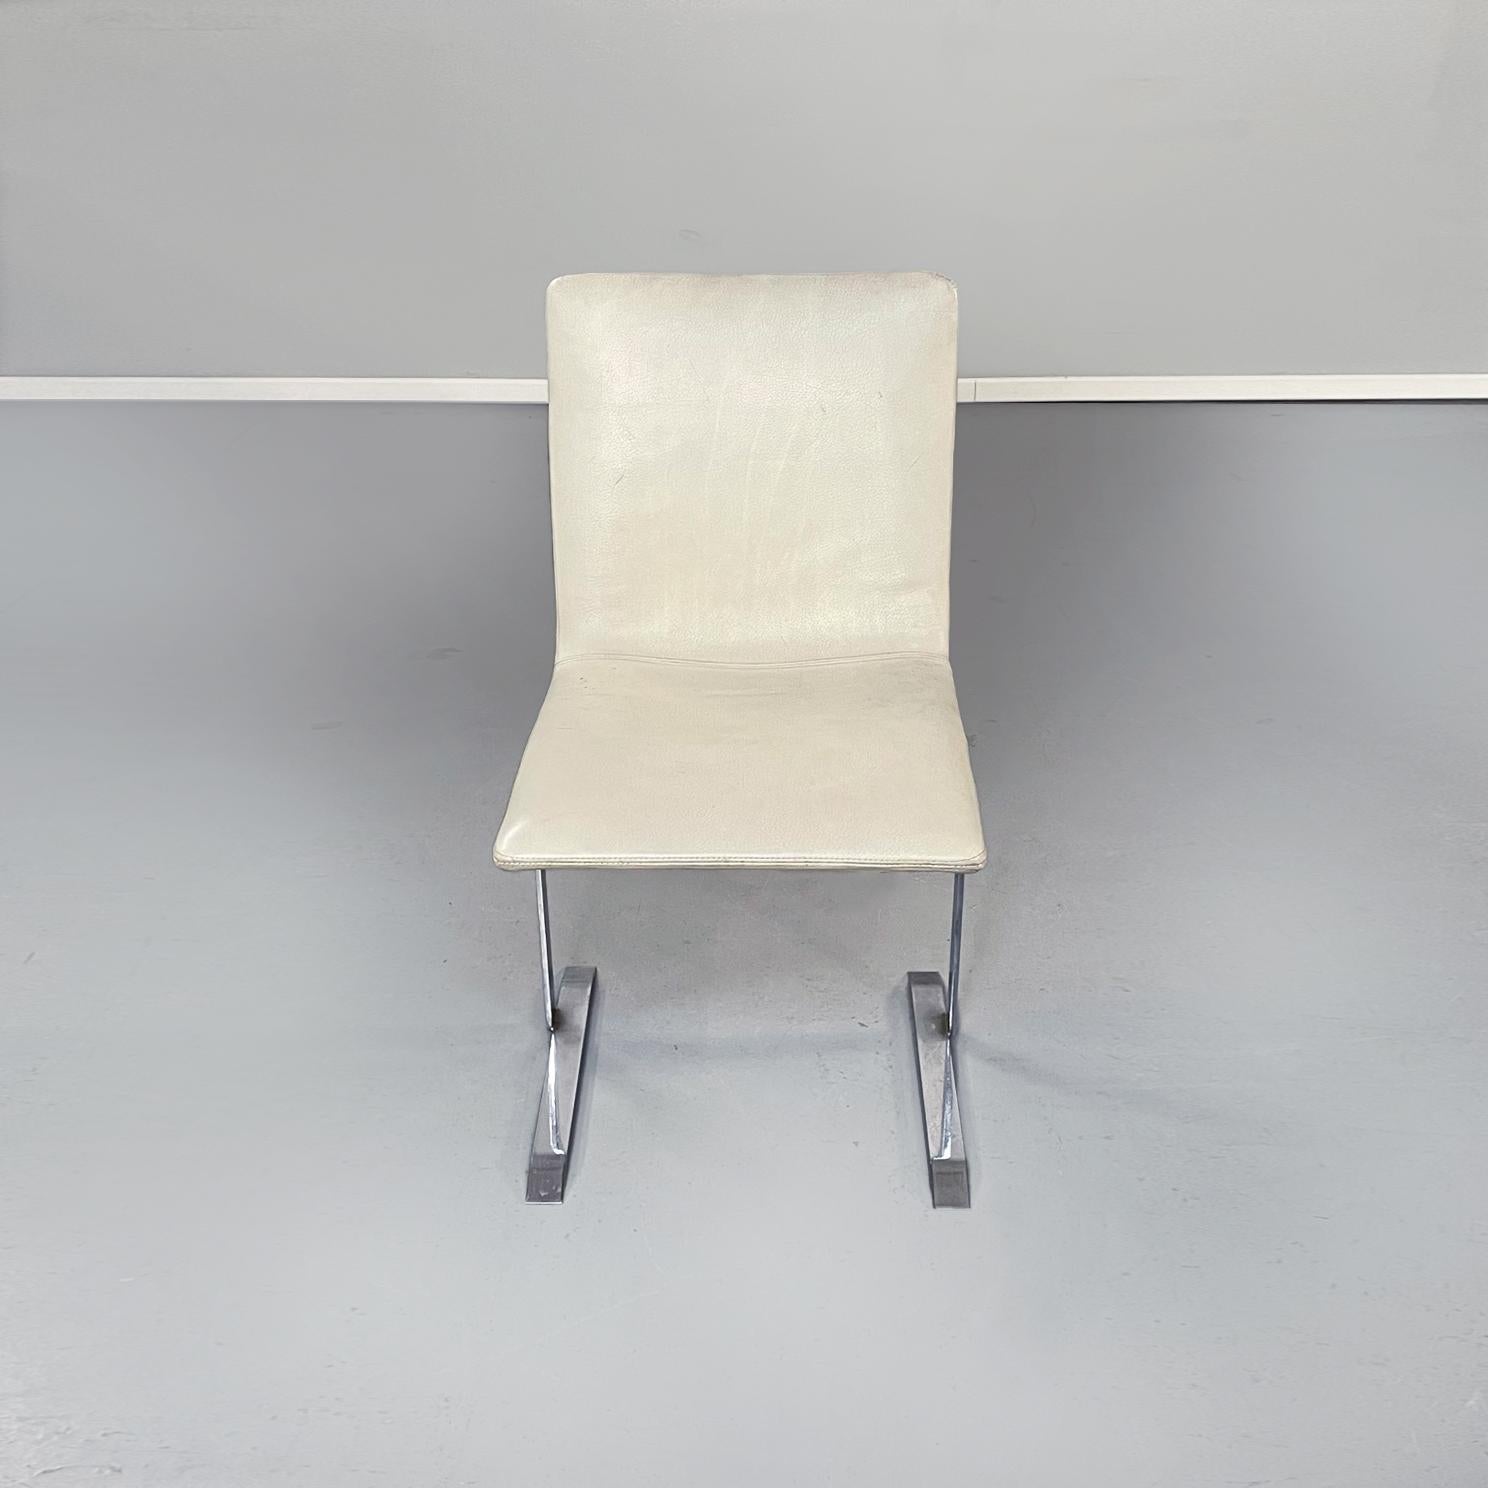 Mid-Century Modern Italian Mid-Century White Leather and Steel Chairs by Offredi for Saporiti, 1970s